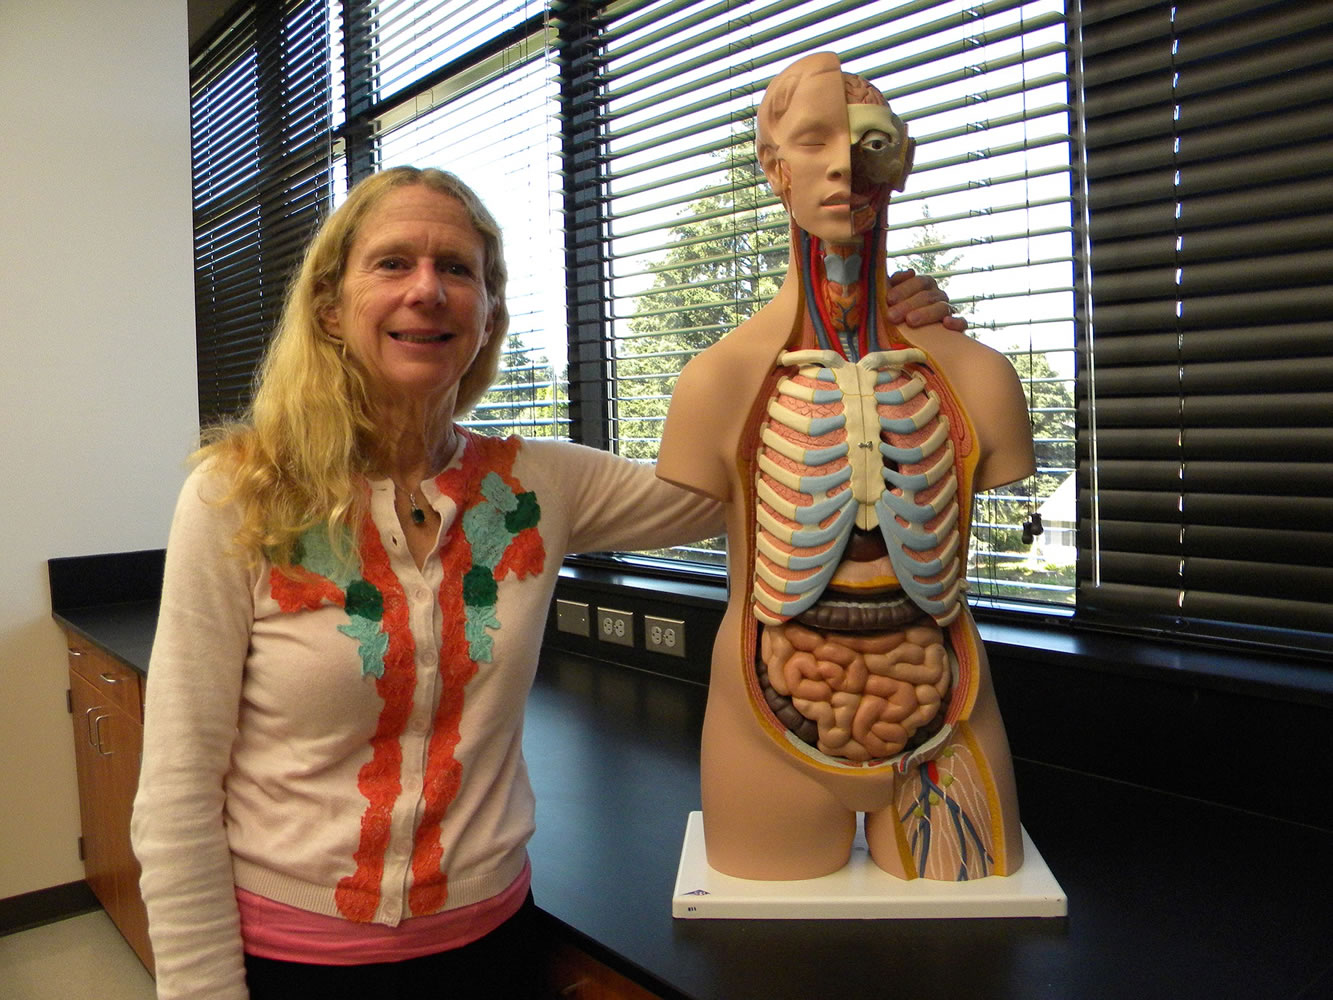 Susie Ridgway uses the partially skinned Skynyrd to teach at Henrietta Lacks Health and Bioscience High School.